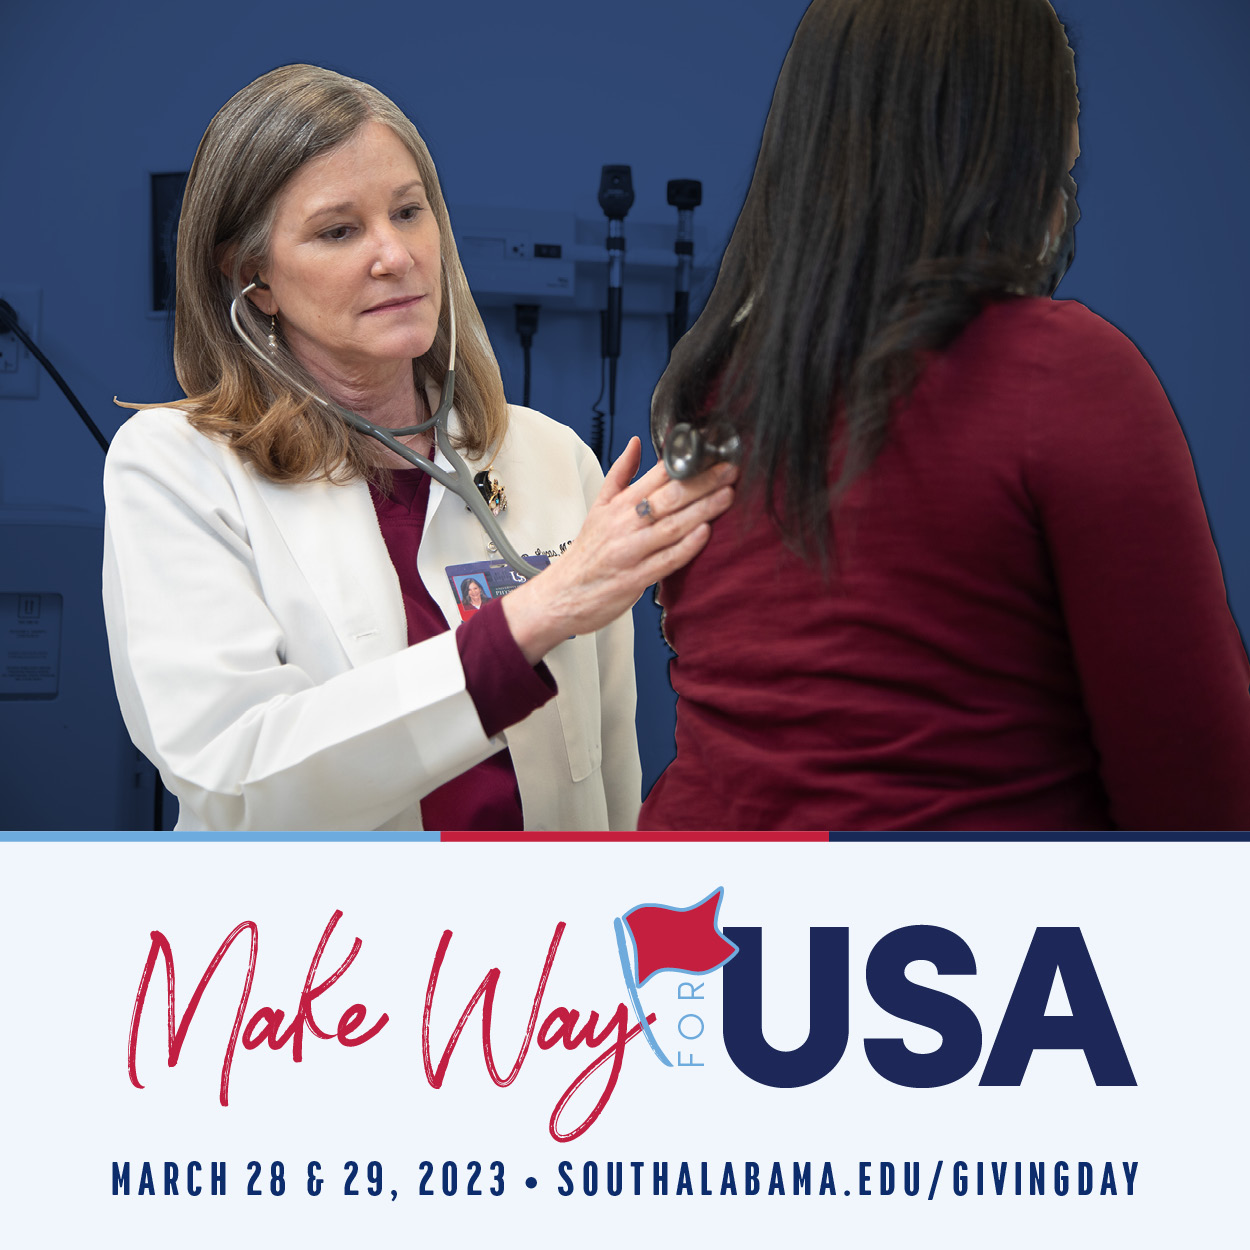 Make Way for USA March 28 and 29, 2023 Southalabama.edu/givingday with image of USA healthcare worker listening to breathing of patient in back.